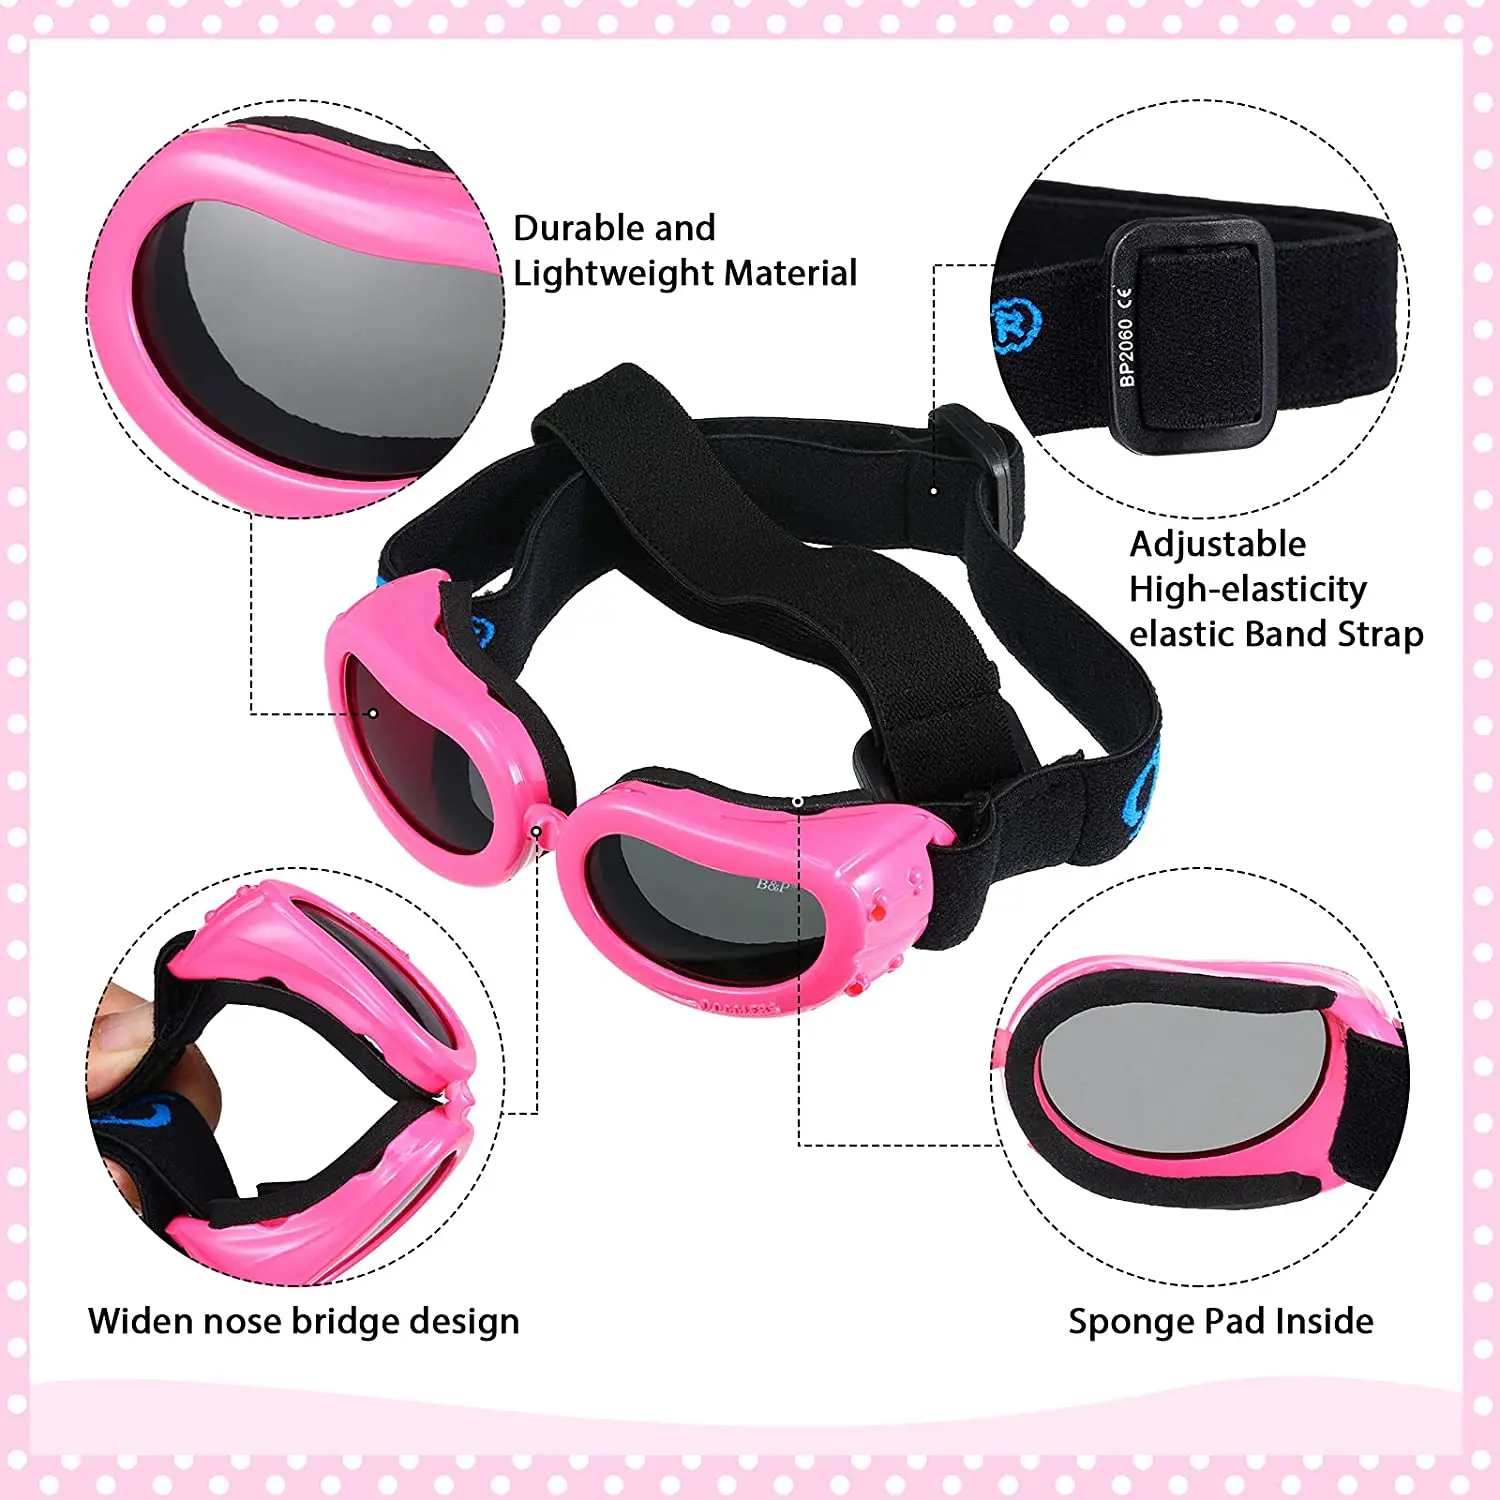 Dog Sunglasses & Helmet Set for Safe and Stylish Outings